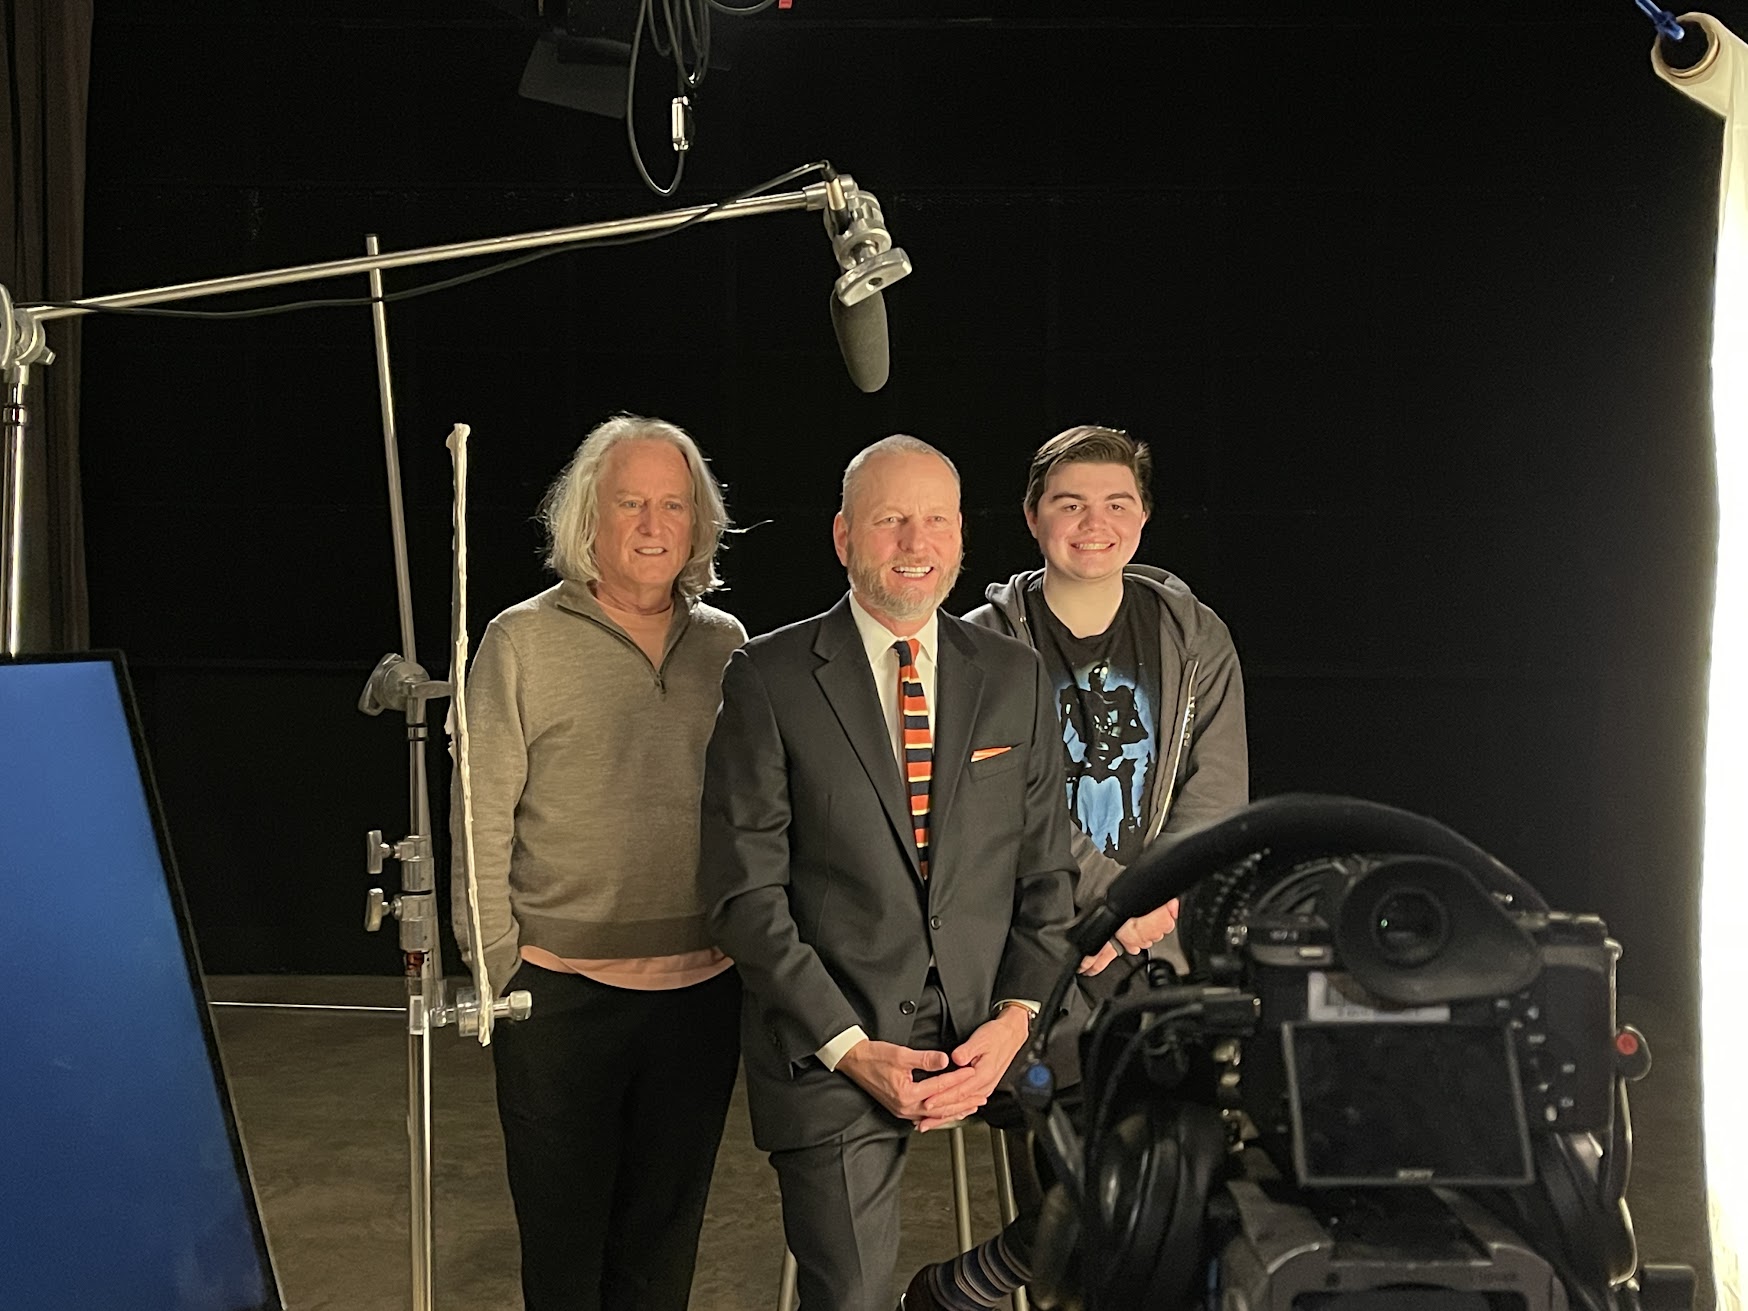 From left to right: Dr. Michael Frierson, Jack Hicks, Chase Gardner